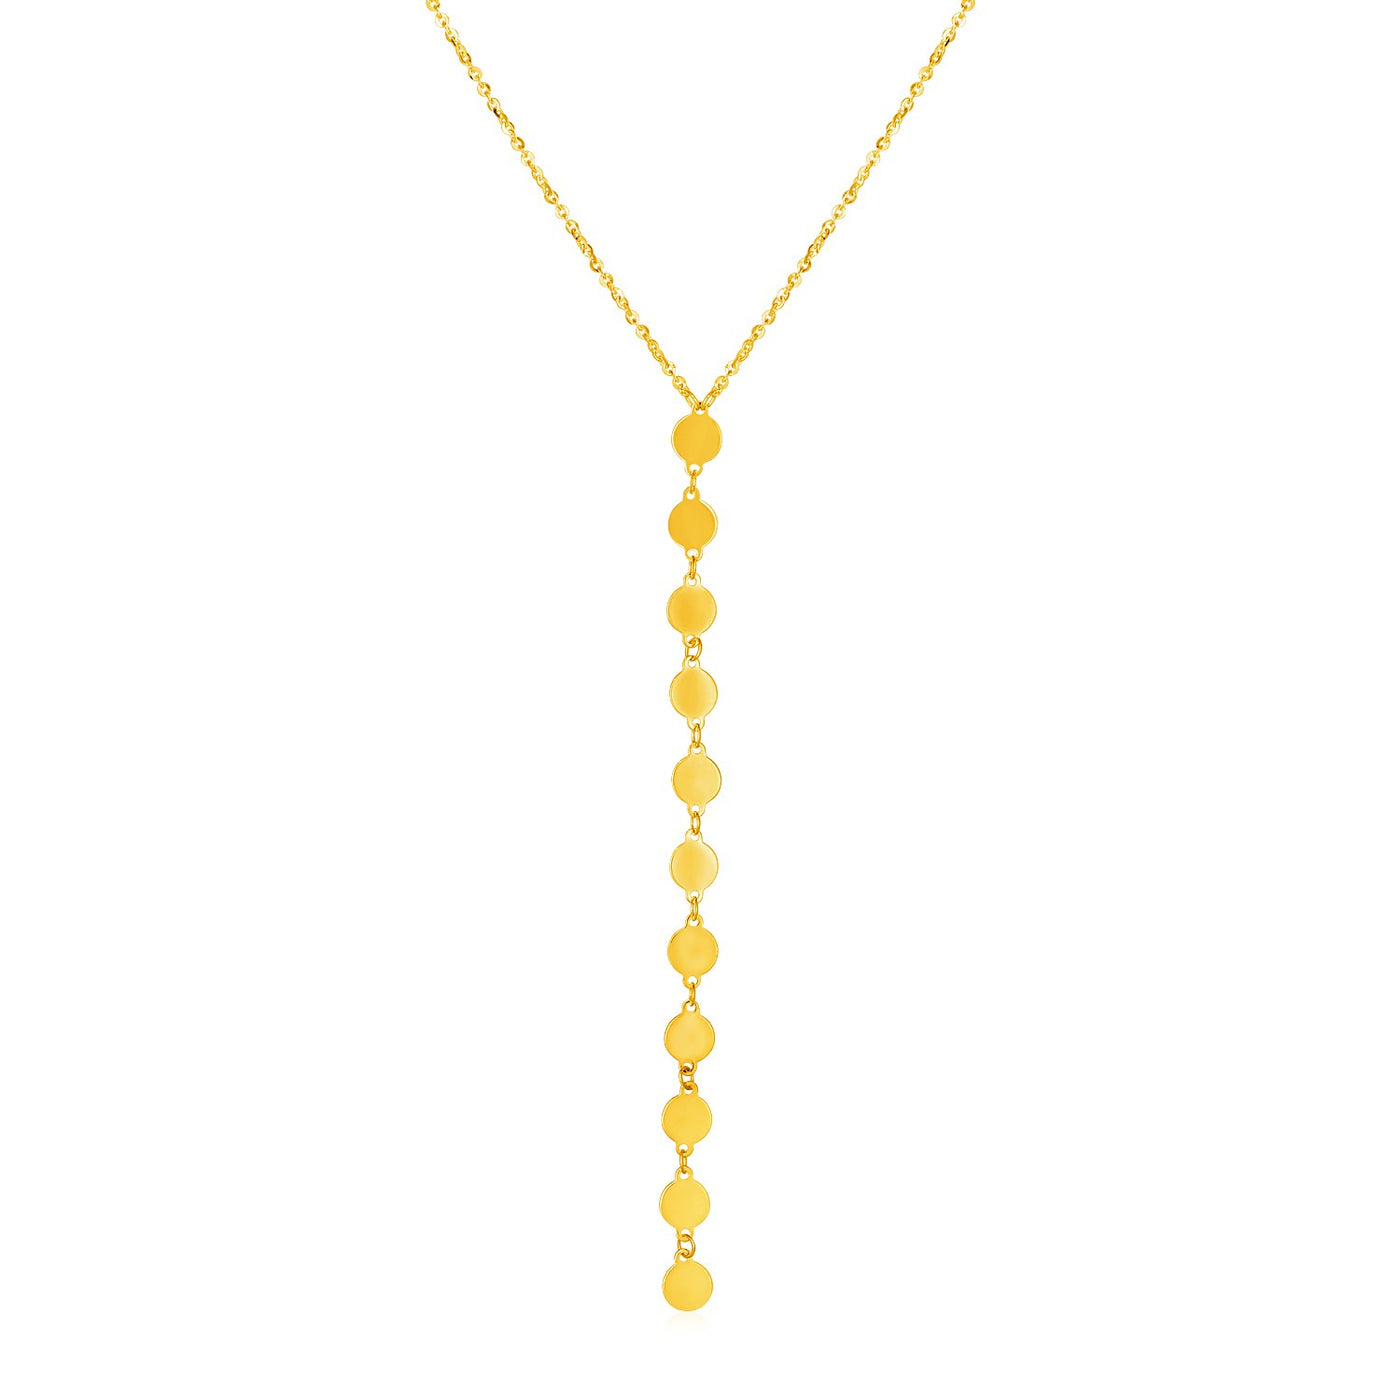 14k Yellow Gold Lariat Style Necklace with Disks